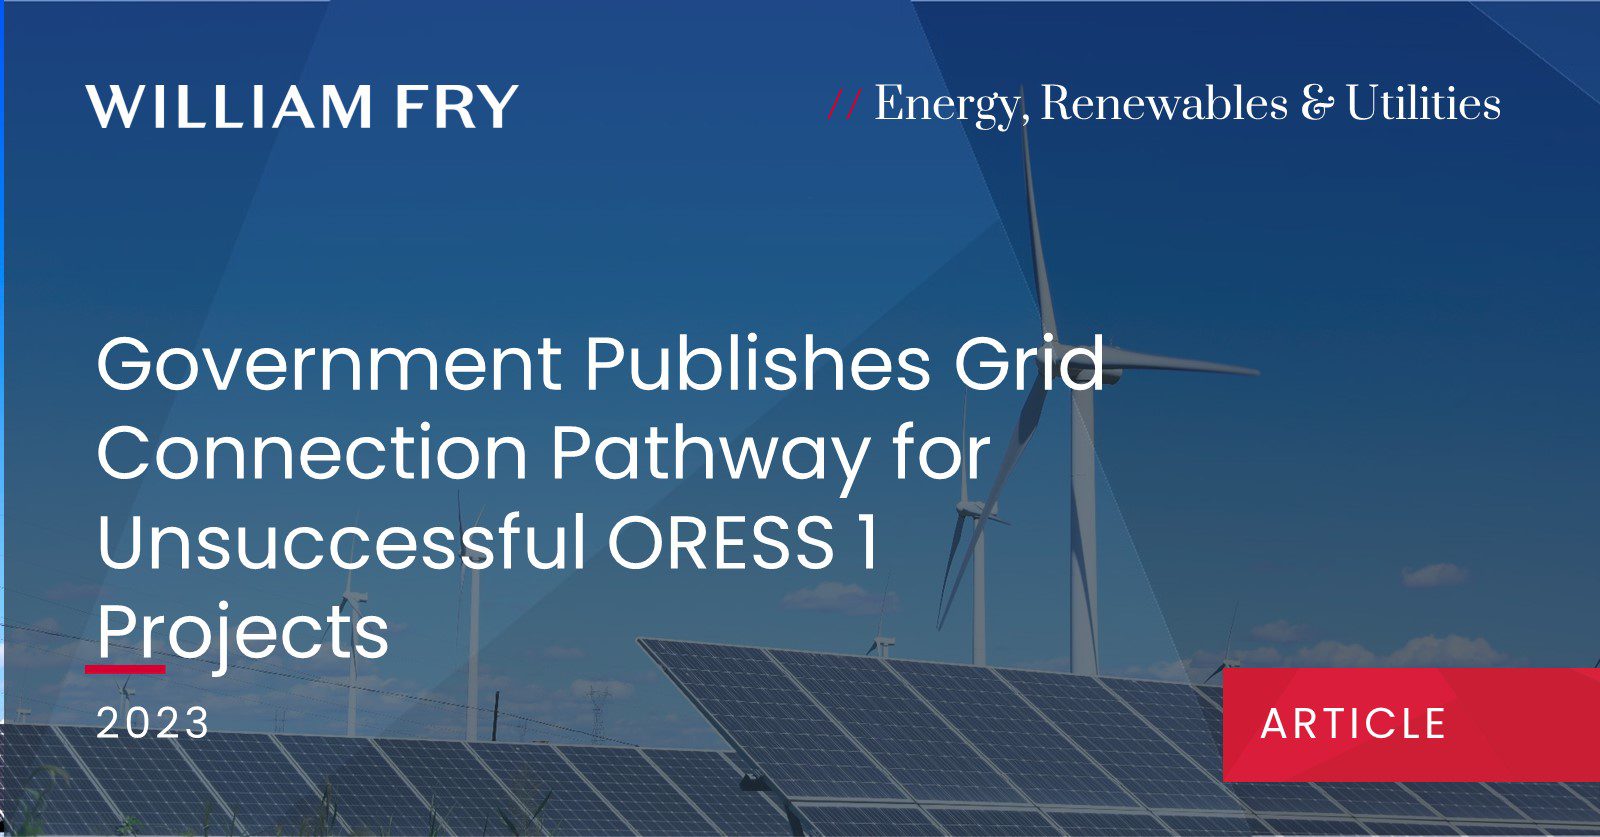 Government Publishes Grid Connection Pathway for Unsuccessful ORESS 1 Projects